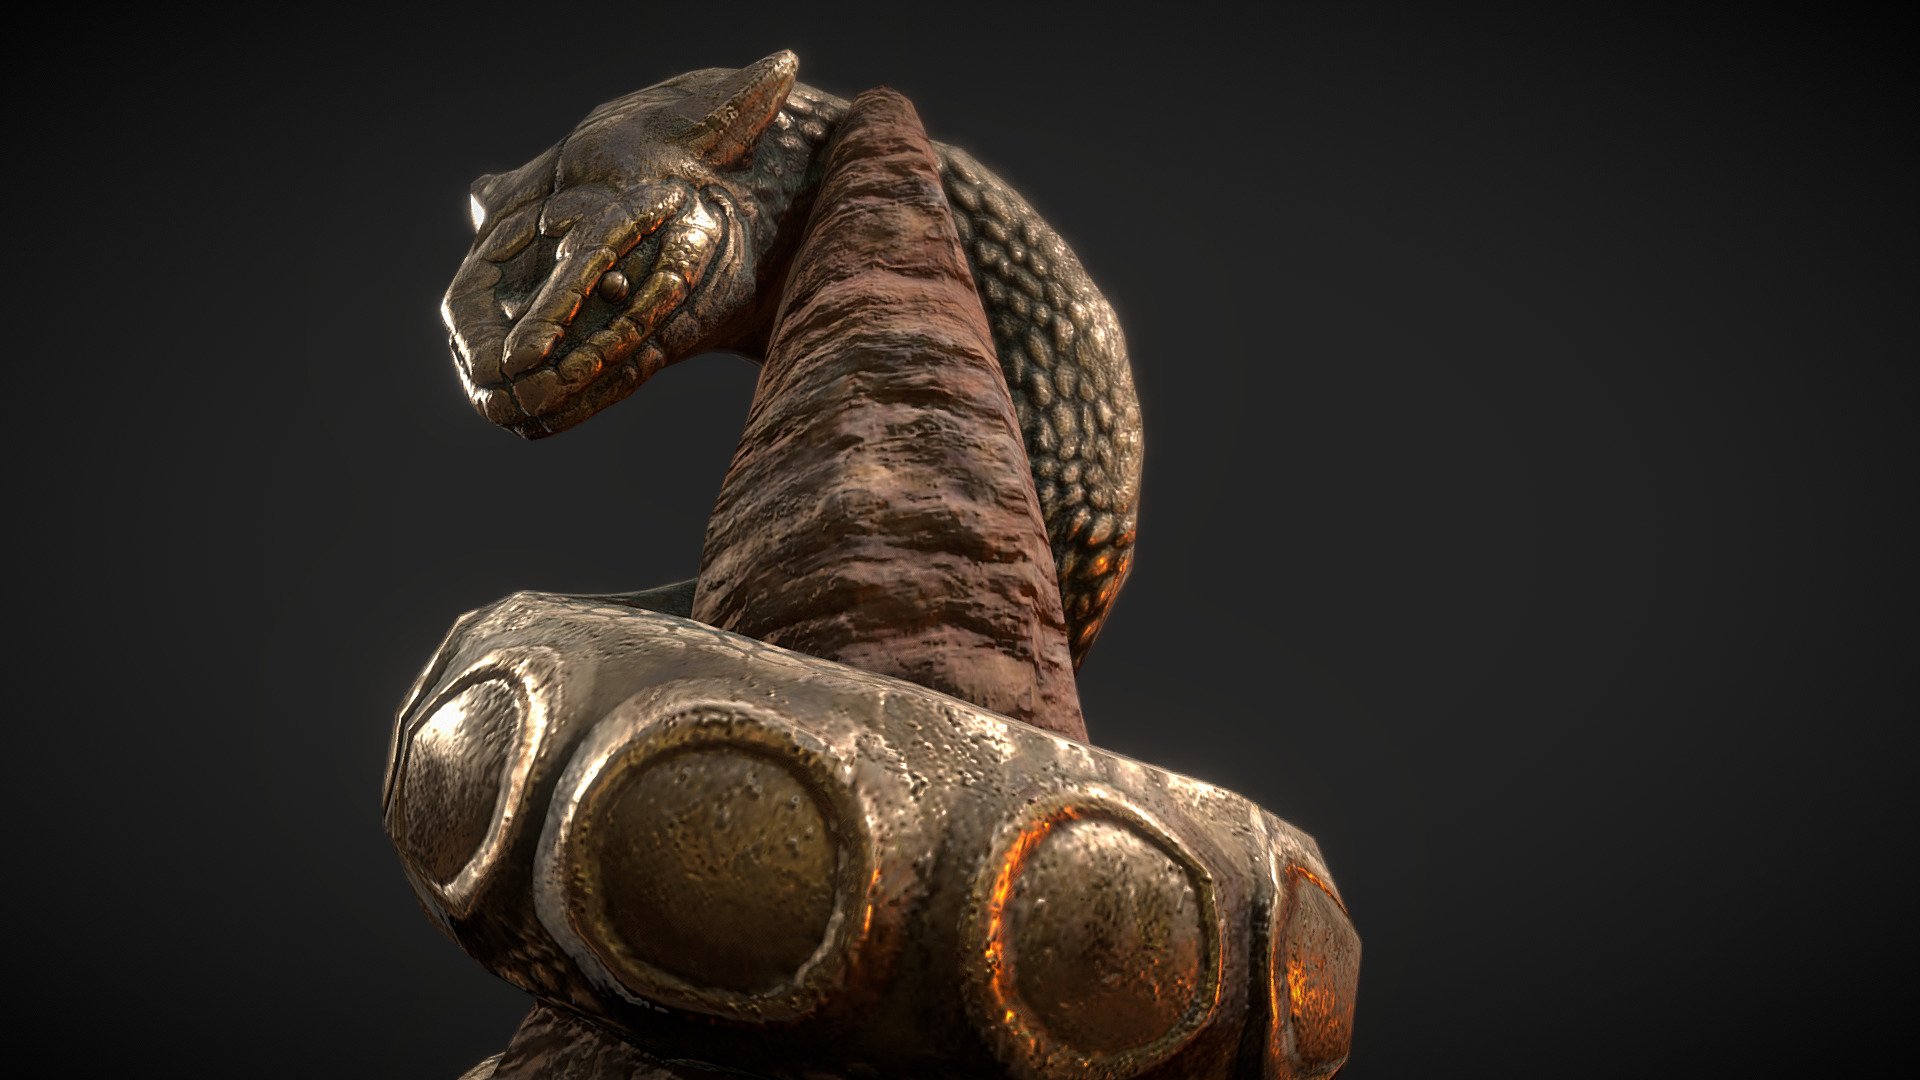 This here is Satakal's Shrine one of the many gods of the Elders Scrolls Universe. Made with Zbrush and Maya 3d model